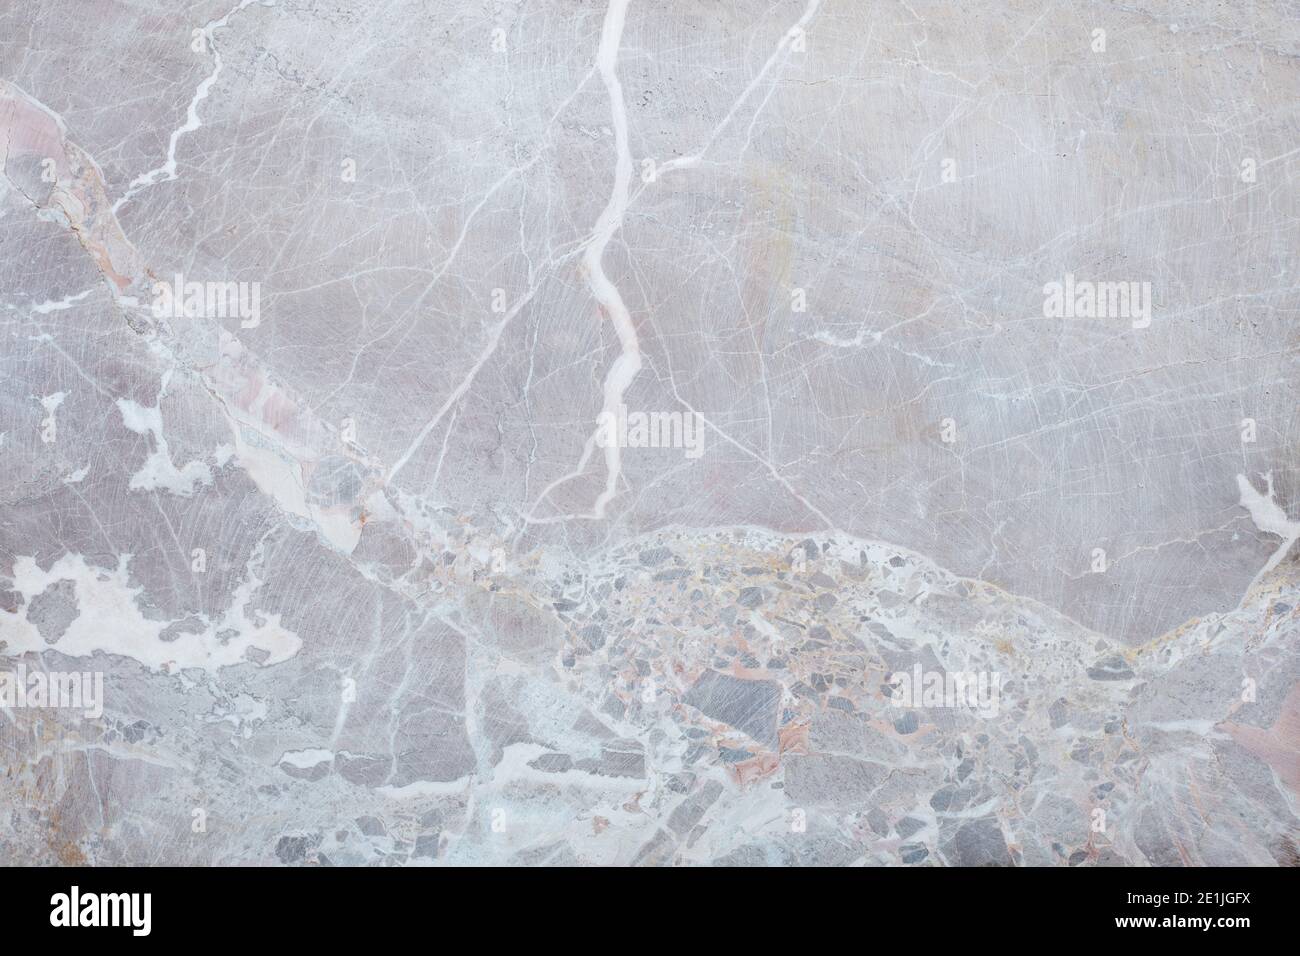 Grey, variegated stone texture background with white vein Stock Photo